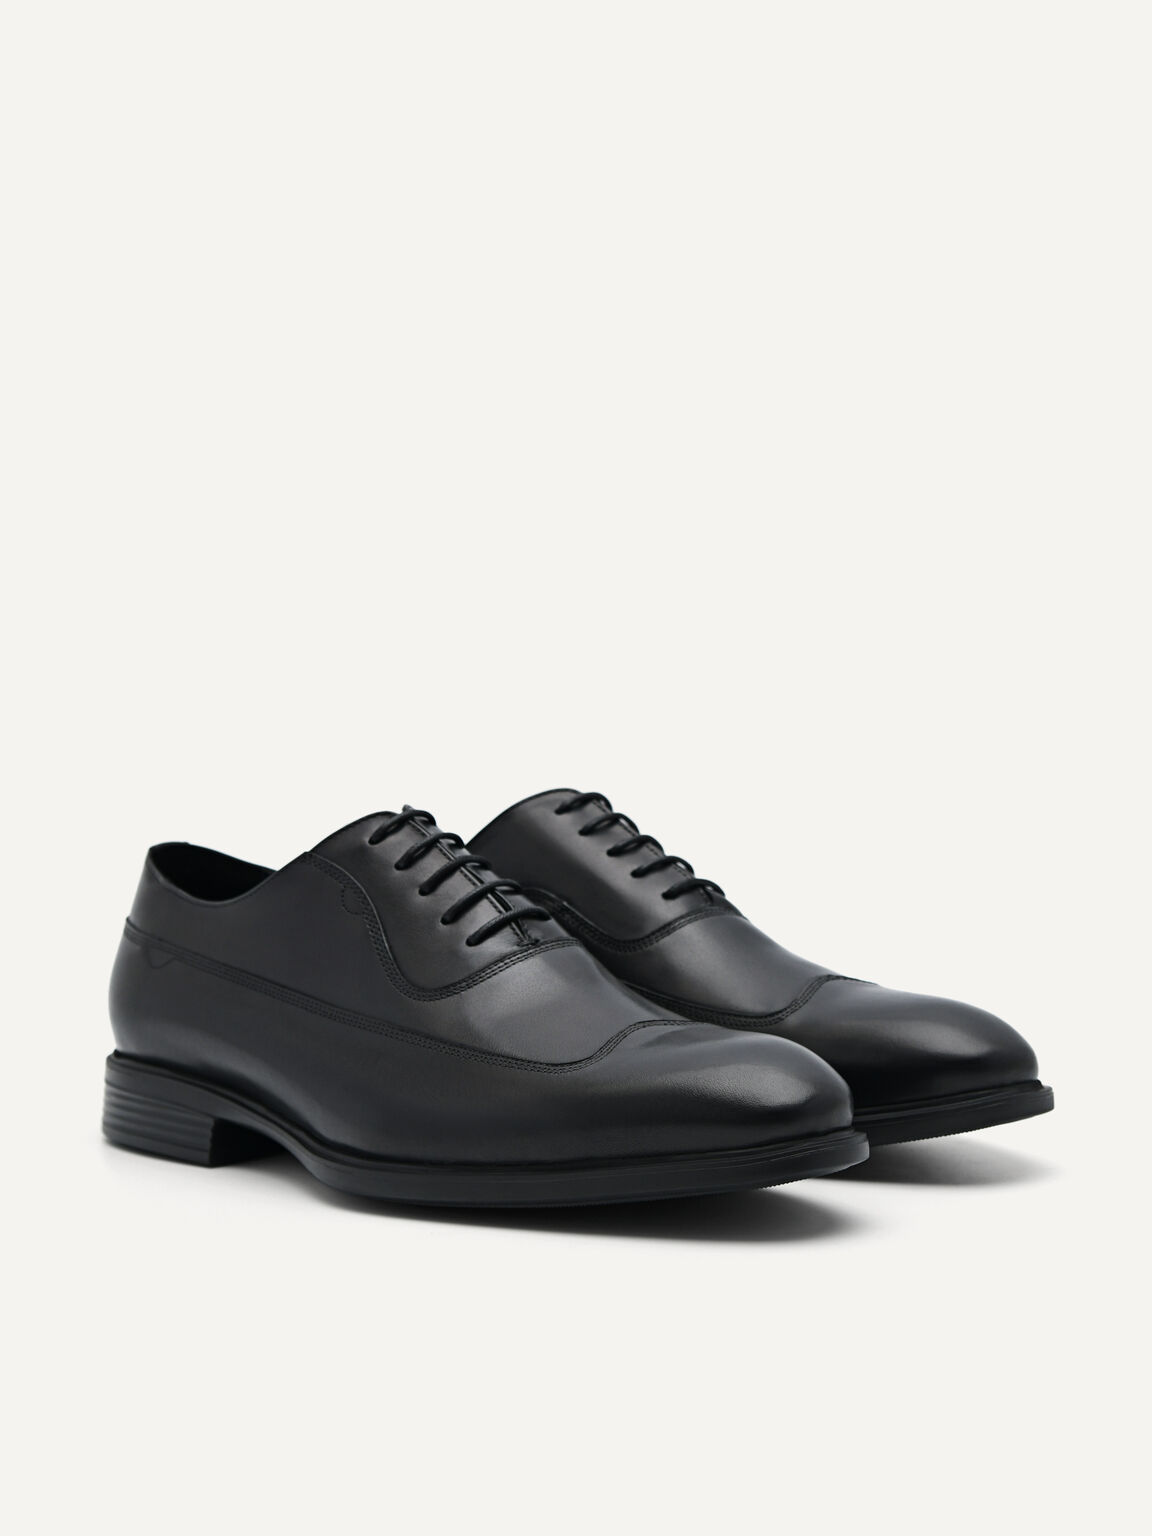 Dylan Leather Oxford Shoes, Black